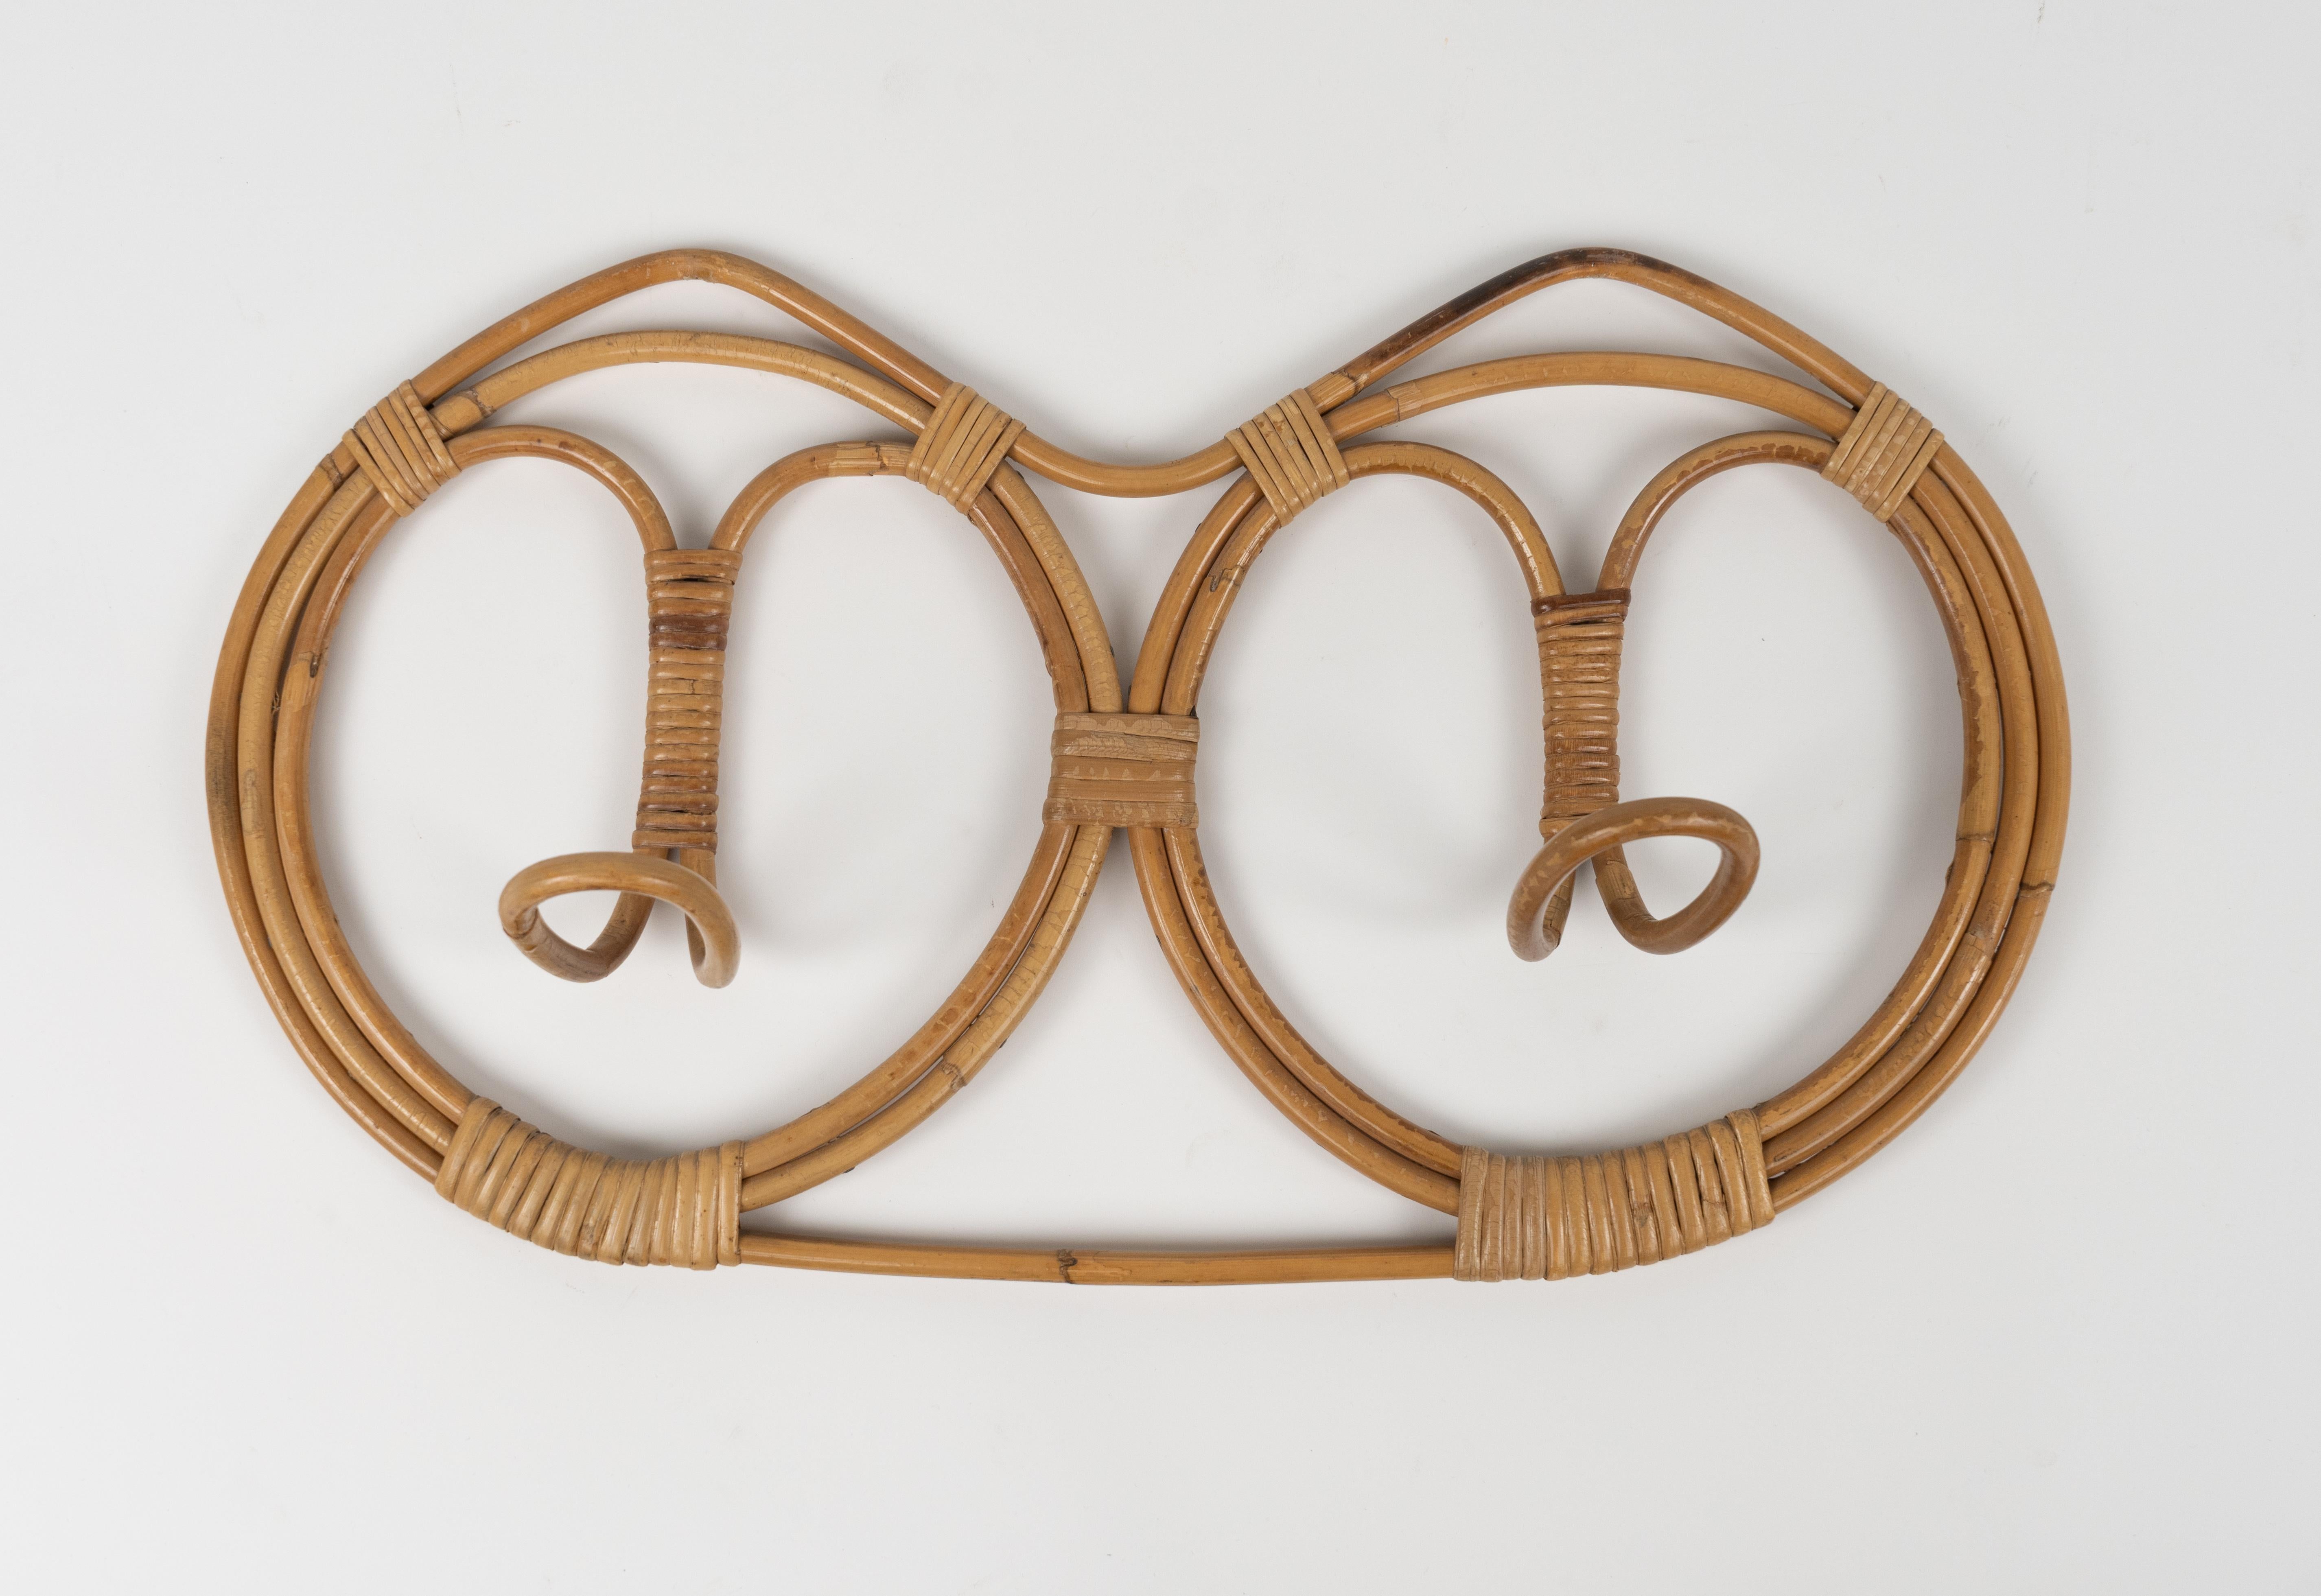 Midcentury Wall Coat Rack in Bamboo and Rattan by Franco Albini, Italy 1960s For Sale 8